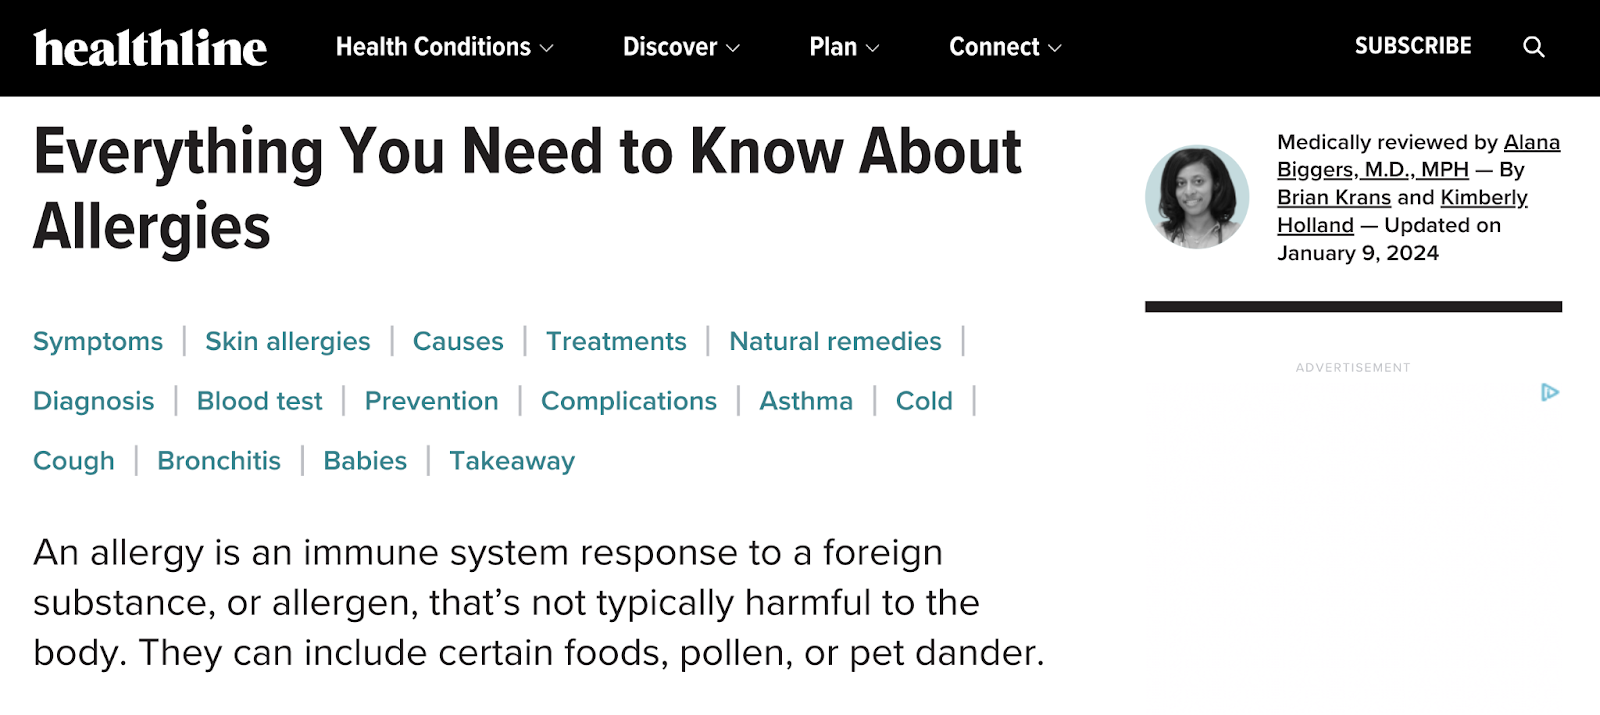 Healthline's nonfiction  called “Everything You Need to Know About Allergies”